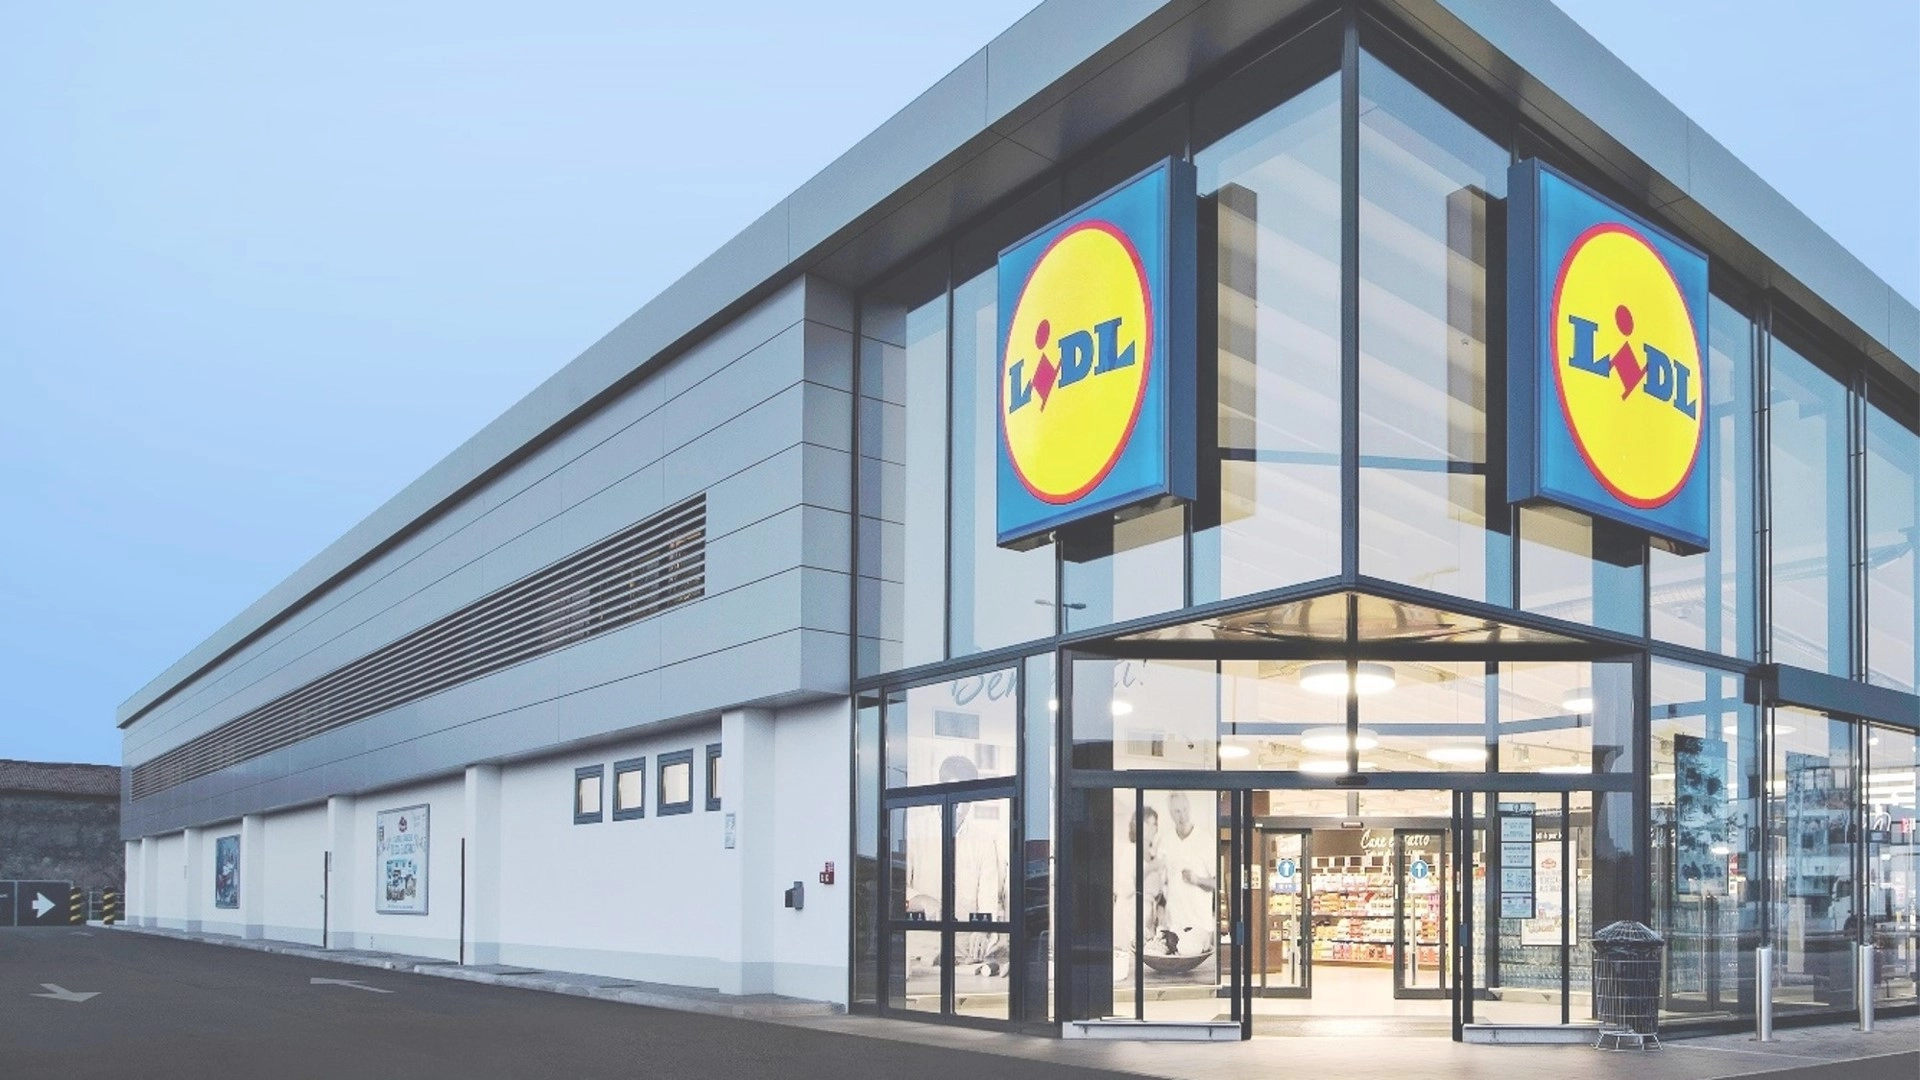 Lidl Asia Pte Limited, Hong Kong, Singapore, Food and Retail, Sourcing, Production, Product Development, Quality, Compliance, Sustainability, Merchandising, Logistics, Cross-Functional, Administration, Careers, Social Responsibility, Textile, Soft Goods, Hard Goods, Graduates